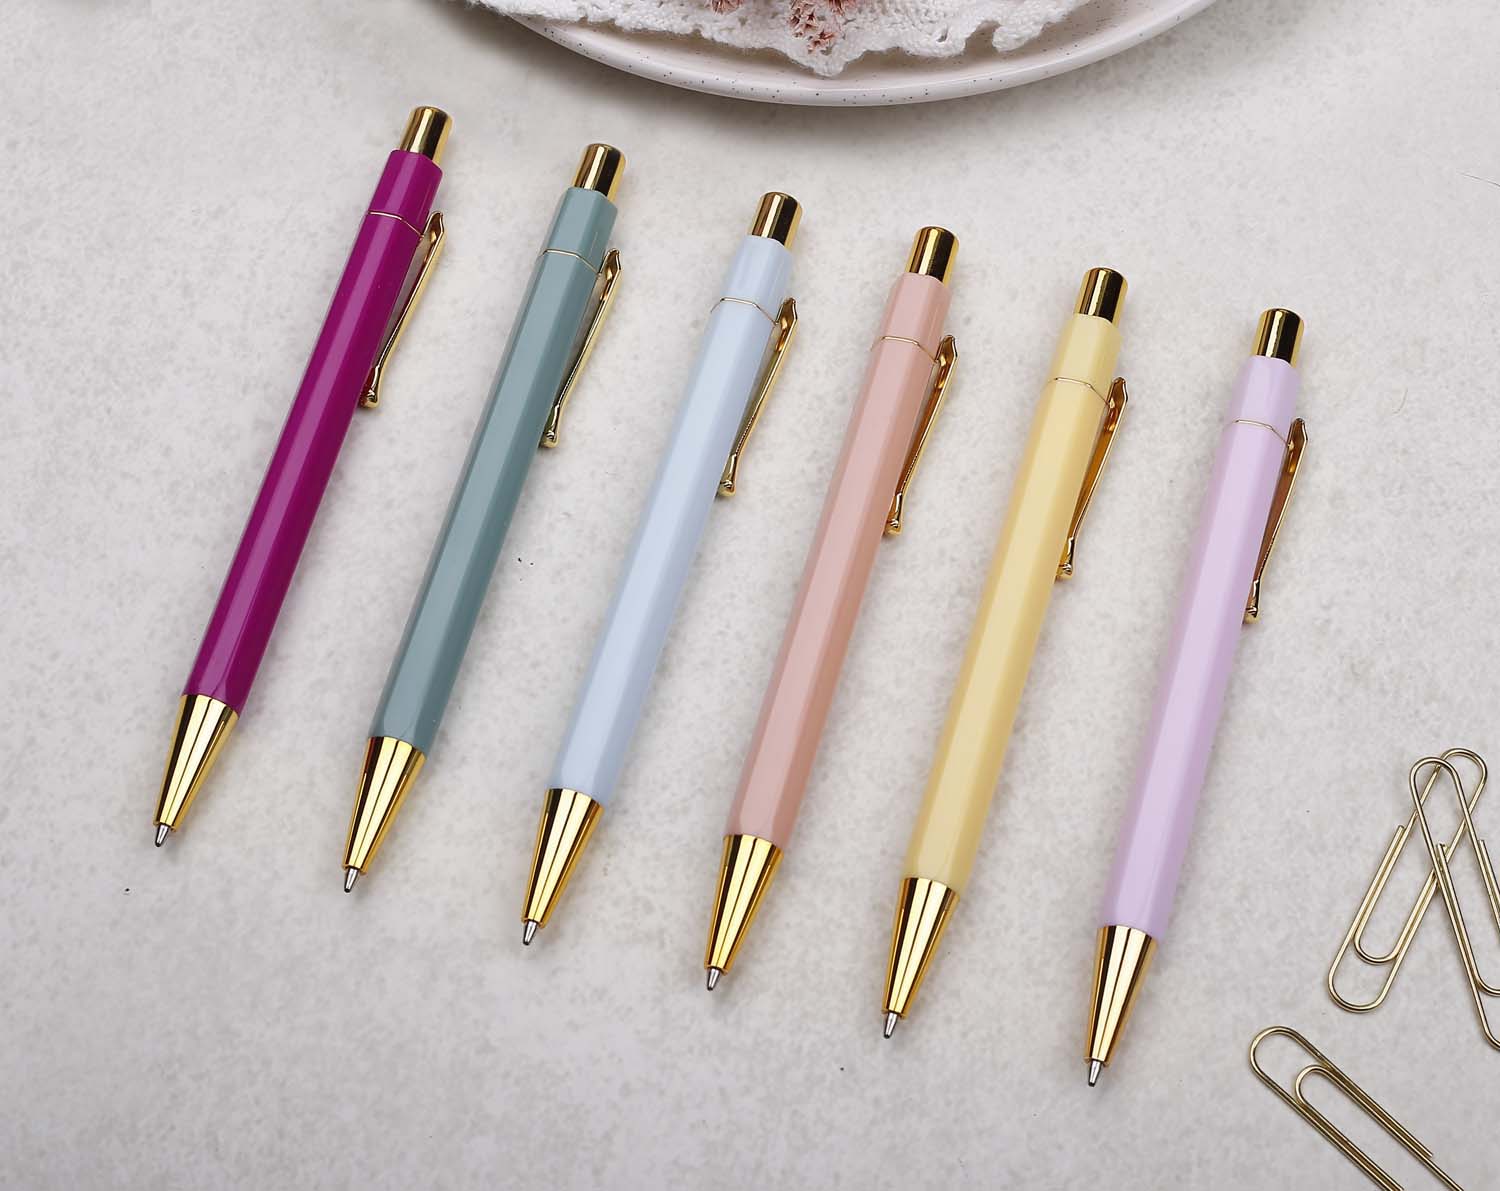 A premium light blue and gold pen with ballpoint tip and hexagonal barrel detail.